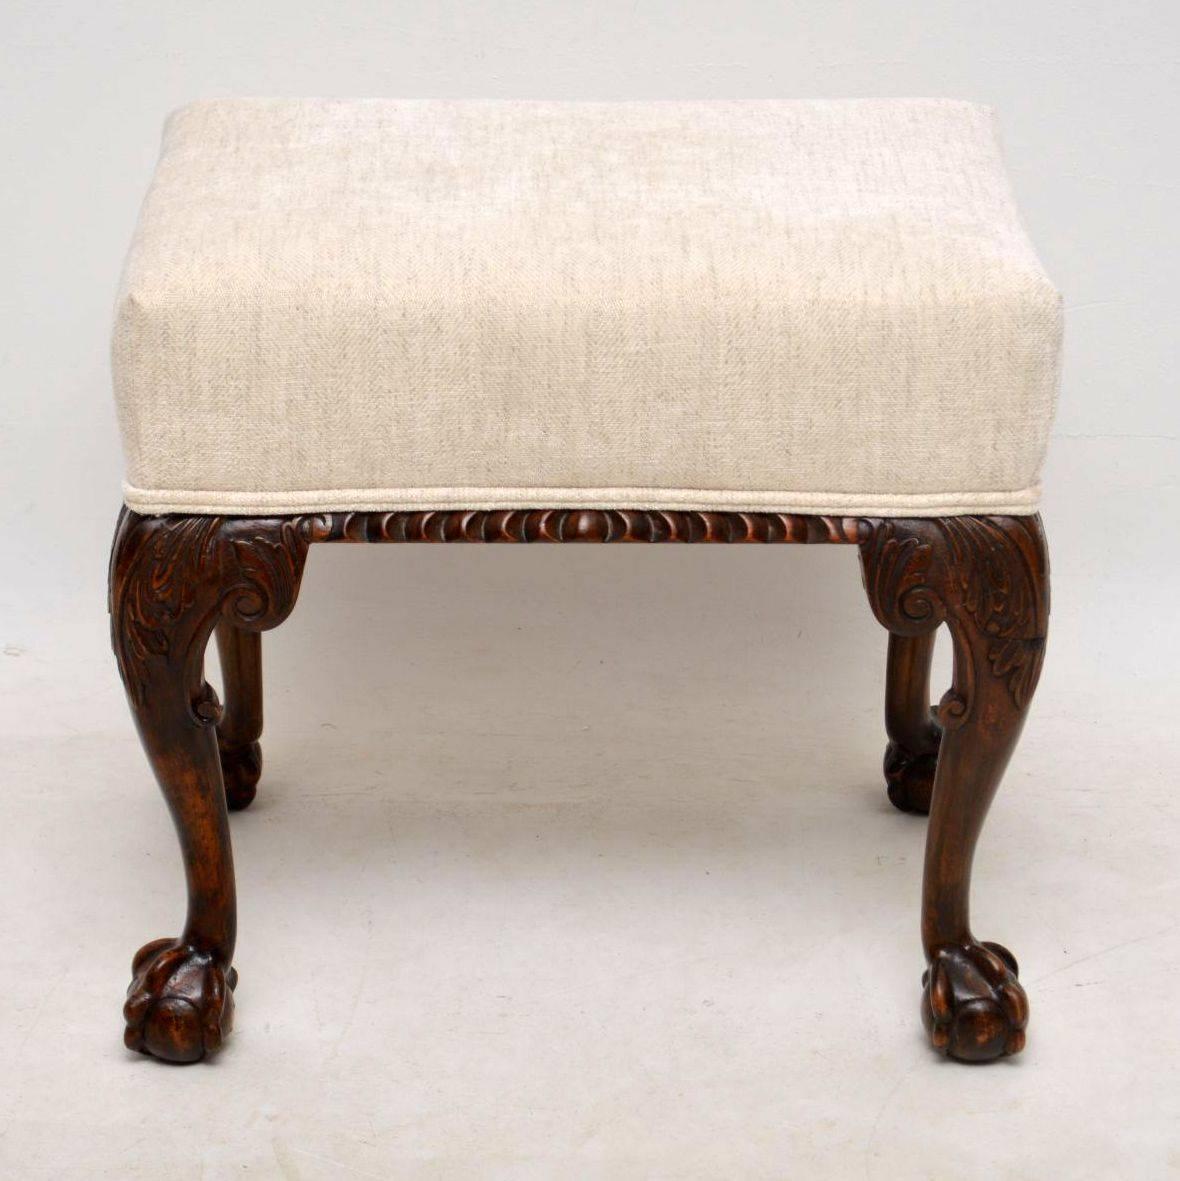 This antique mahogany upholstered stool dates from around the 1890’s period & is designed very much in Chippendale manner. It’s beautifully carved around the seat & on the legs which have claw & ball feet. This stool is in very good condition & has